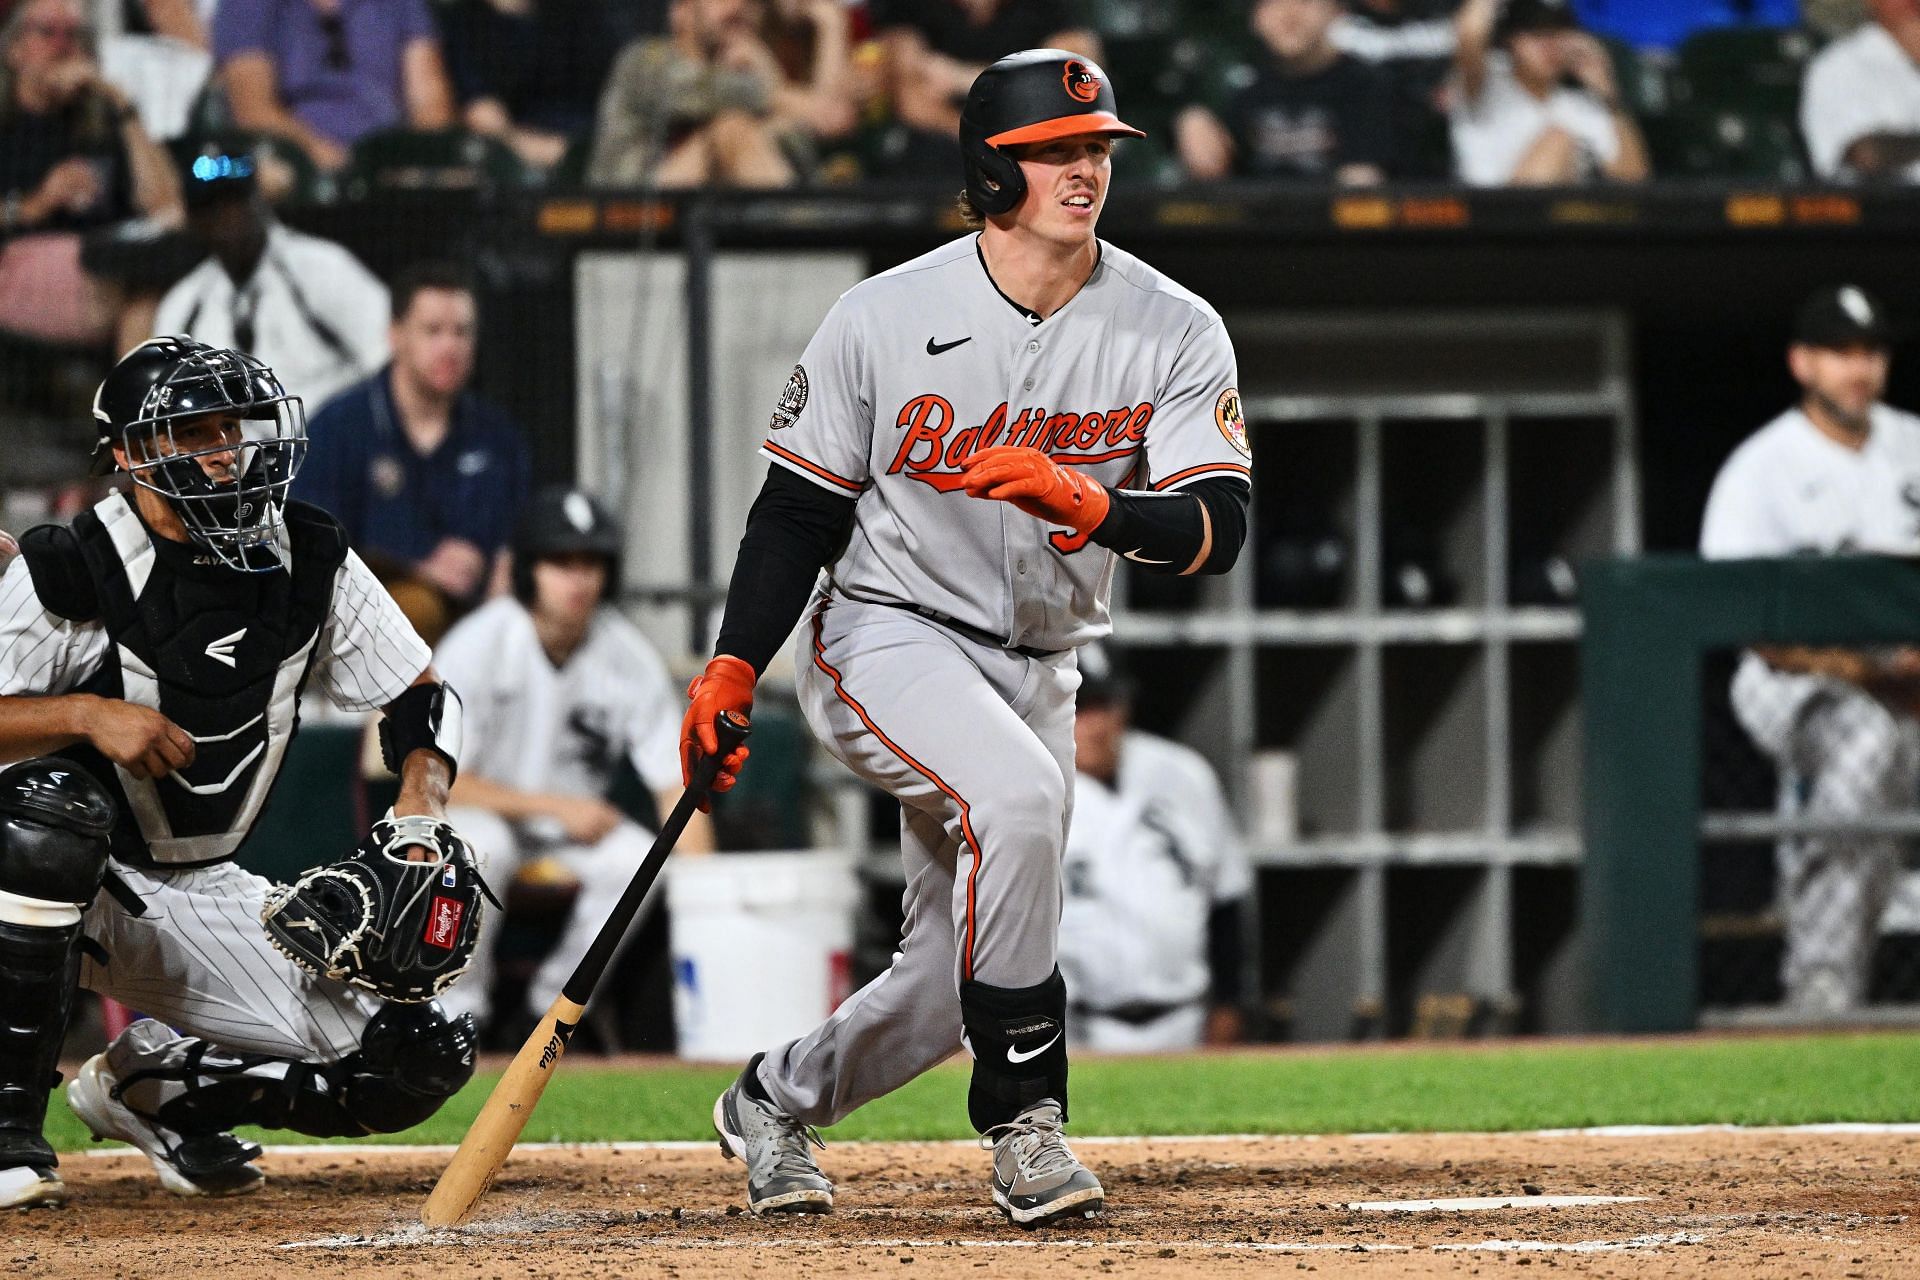 Adley Rutschman belts a double down the right field line during a Baltimore Orioles v Chicago White Sox game at Guaranteed Rate Field in Chicago, Illinois.